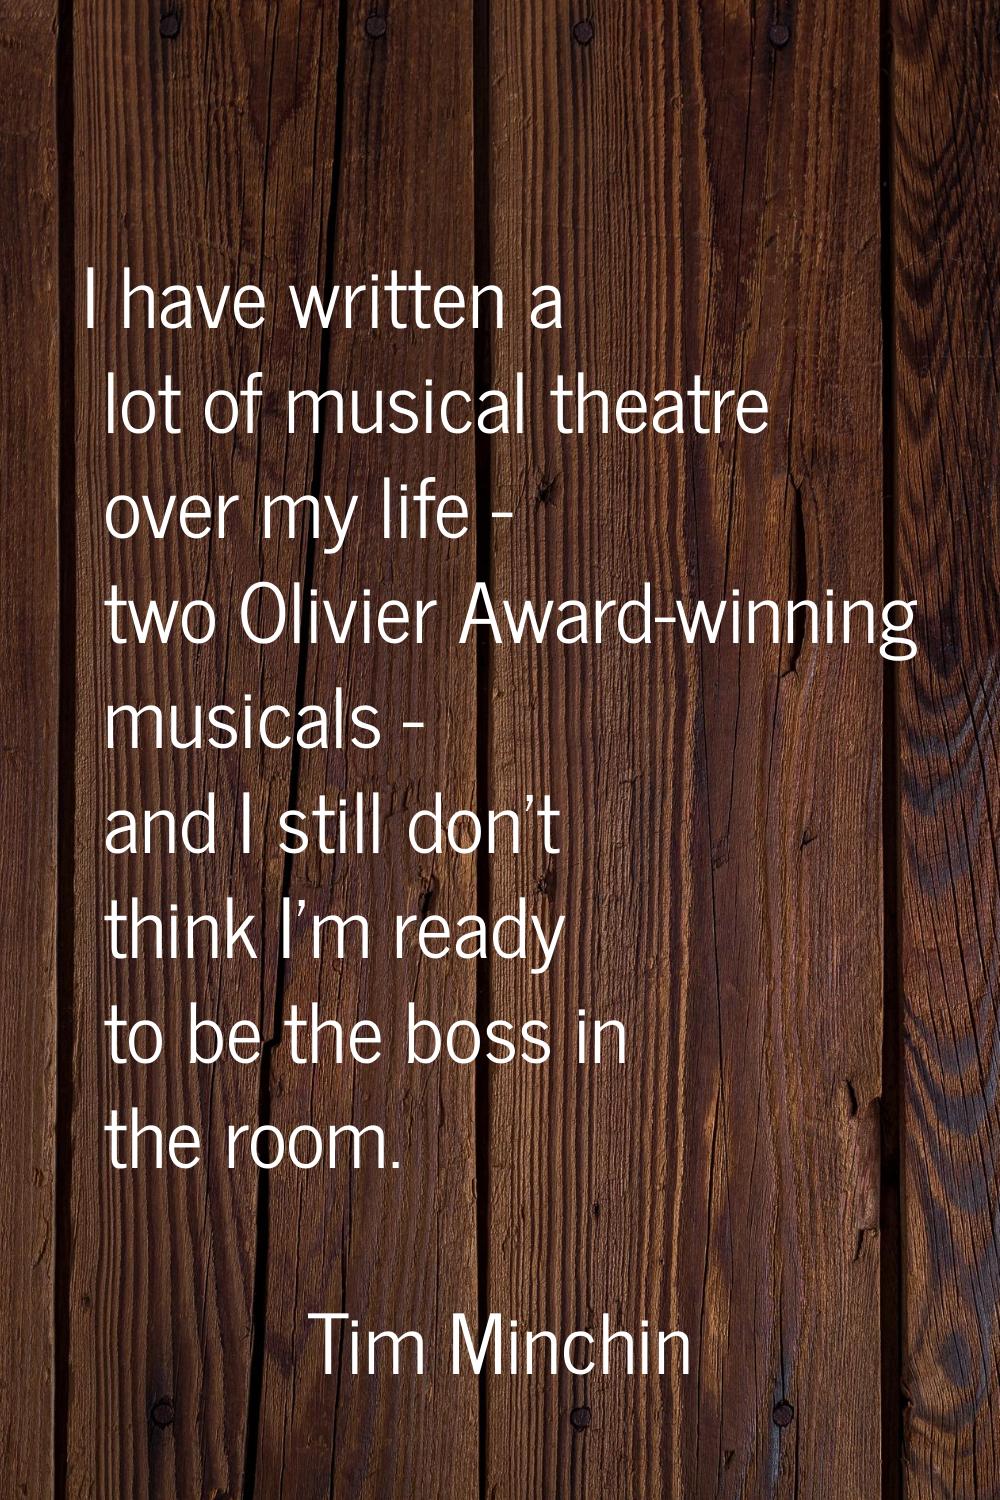 I have written a lot of musical theatre over my life - two Olivier Award-winning musicals - and I s